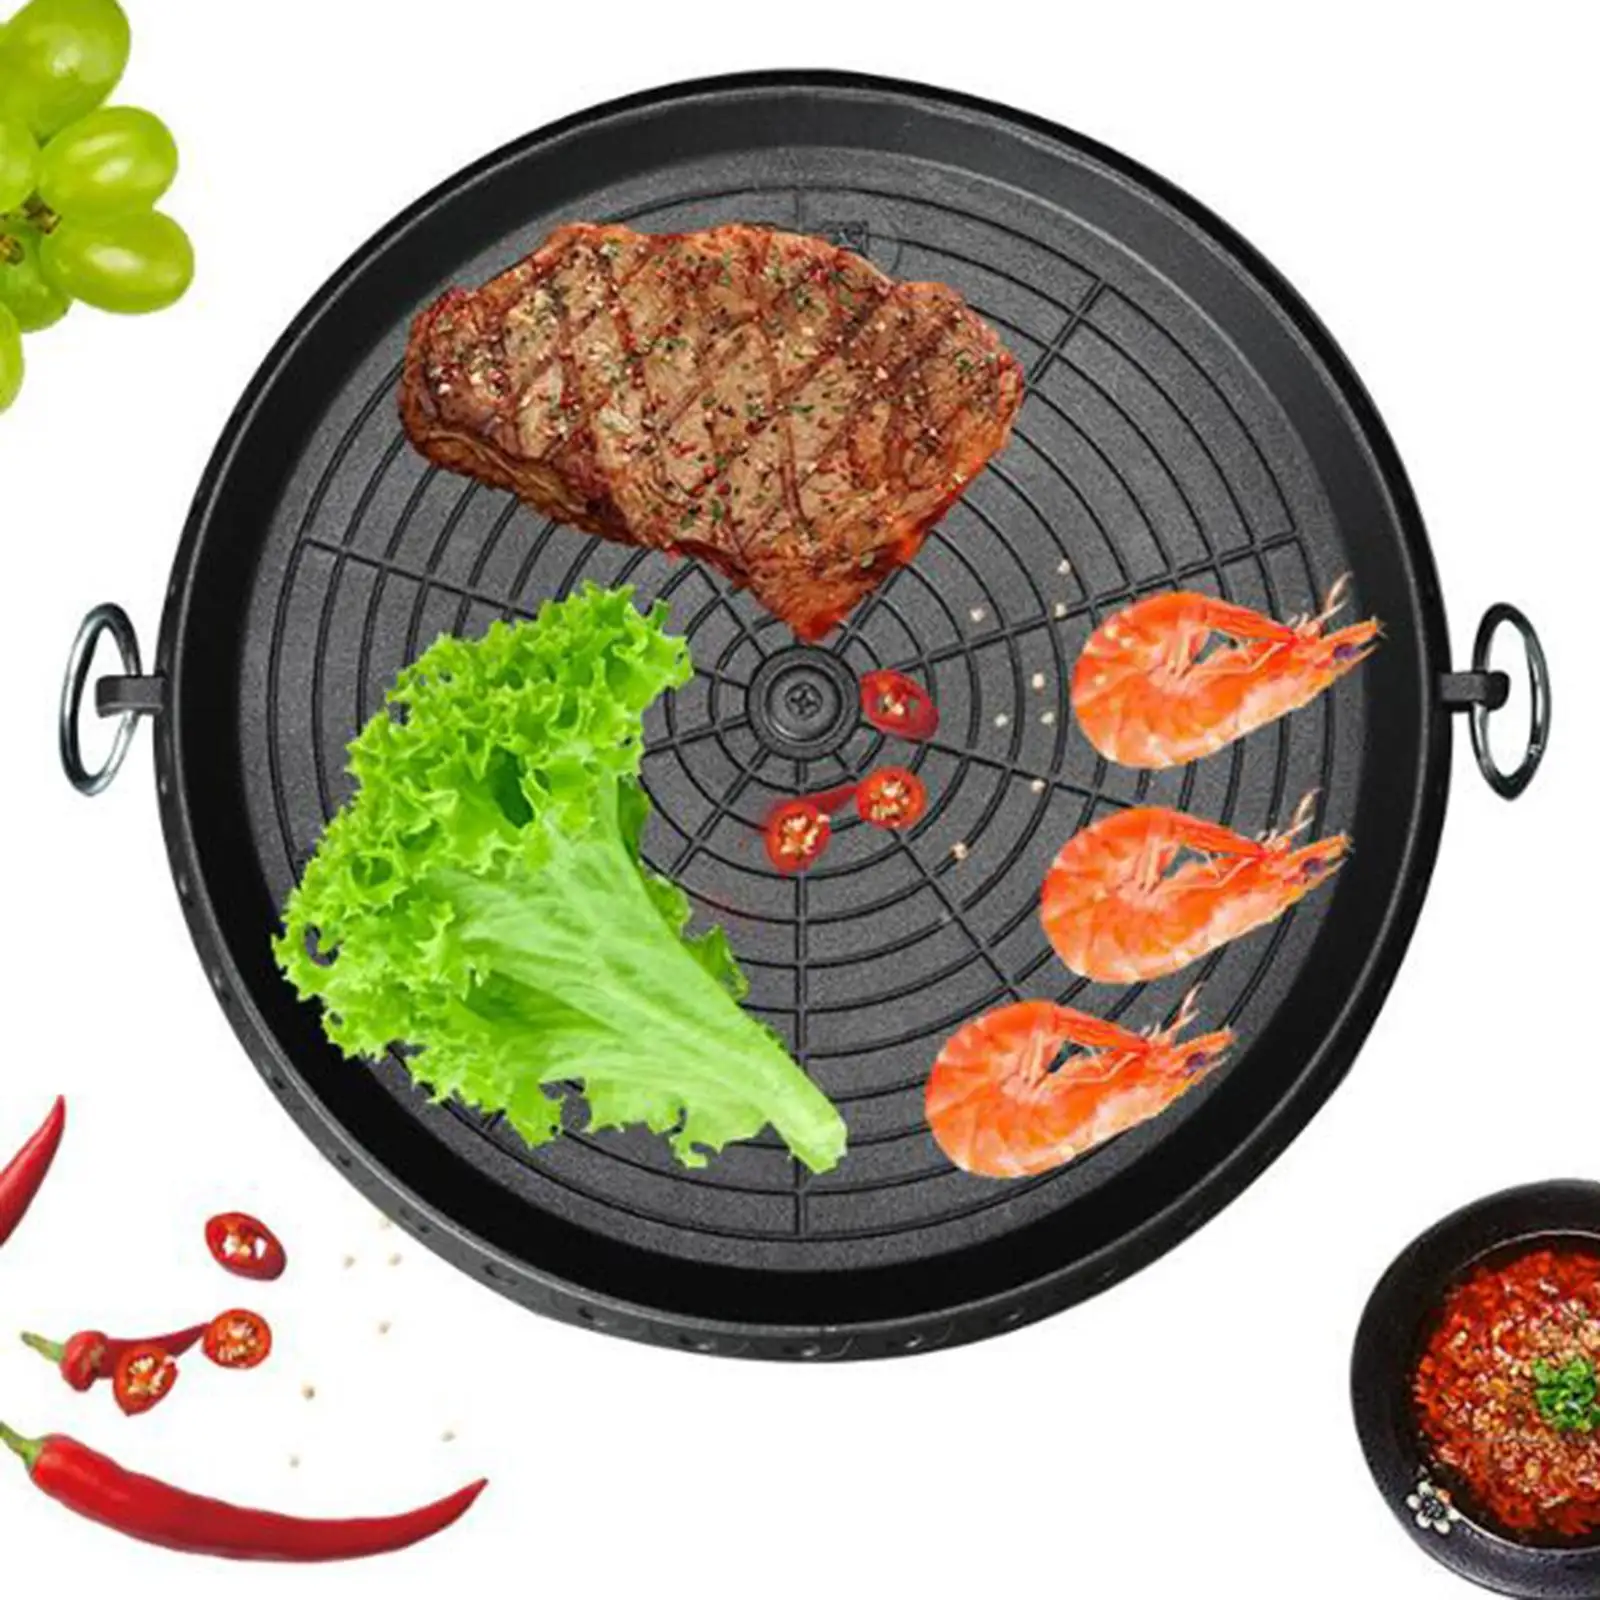 Frying Pan Griddle with Handle Cookware Grill Pan Indoor Outdoor Barbecue Picnic